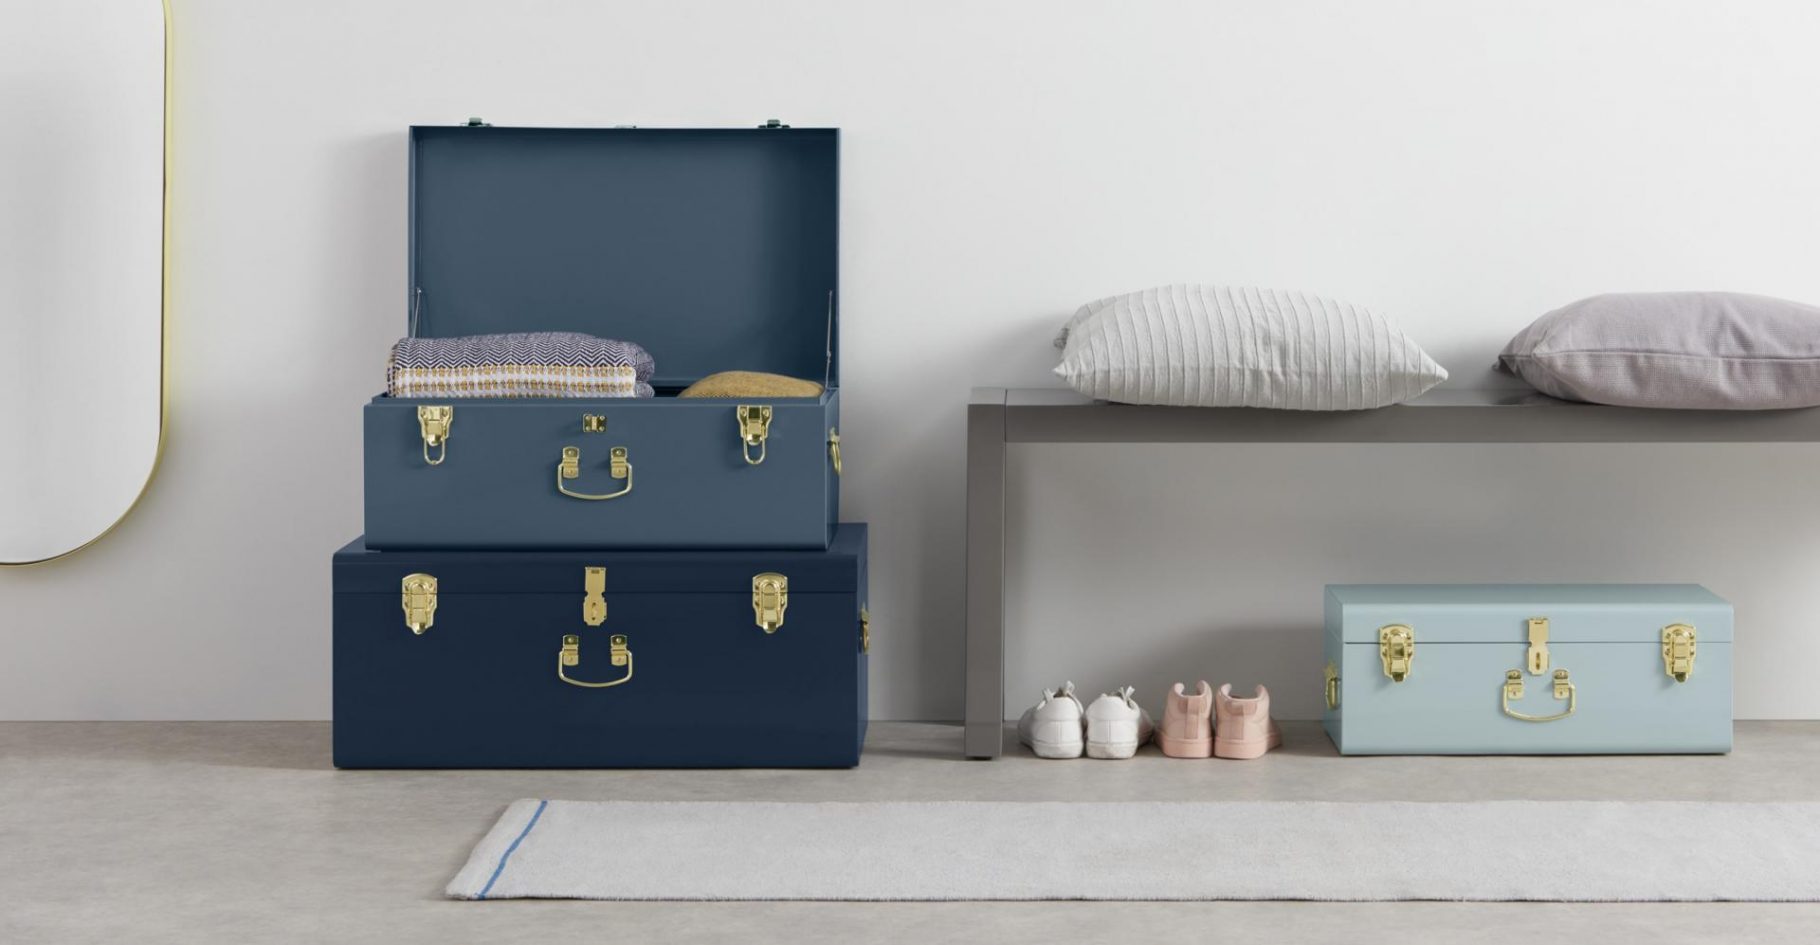 Tonal Blue Trunk Storage Living Room Decor Inspiration | Blue is a really versatile colour to decorate your home with. But, which colours and tones work well? What kind of accessories work with blue? This post gives you ideas for pulling together an elegant, calming blue colour palette and pieces for your home. Read more: kittyandb.com #Blue #colourfulhomedecor #interiordecoratinginspiration #storage